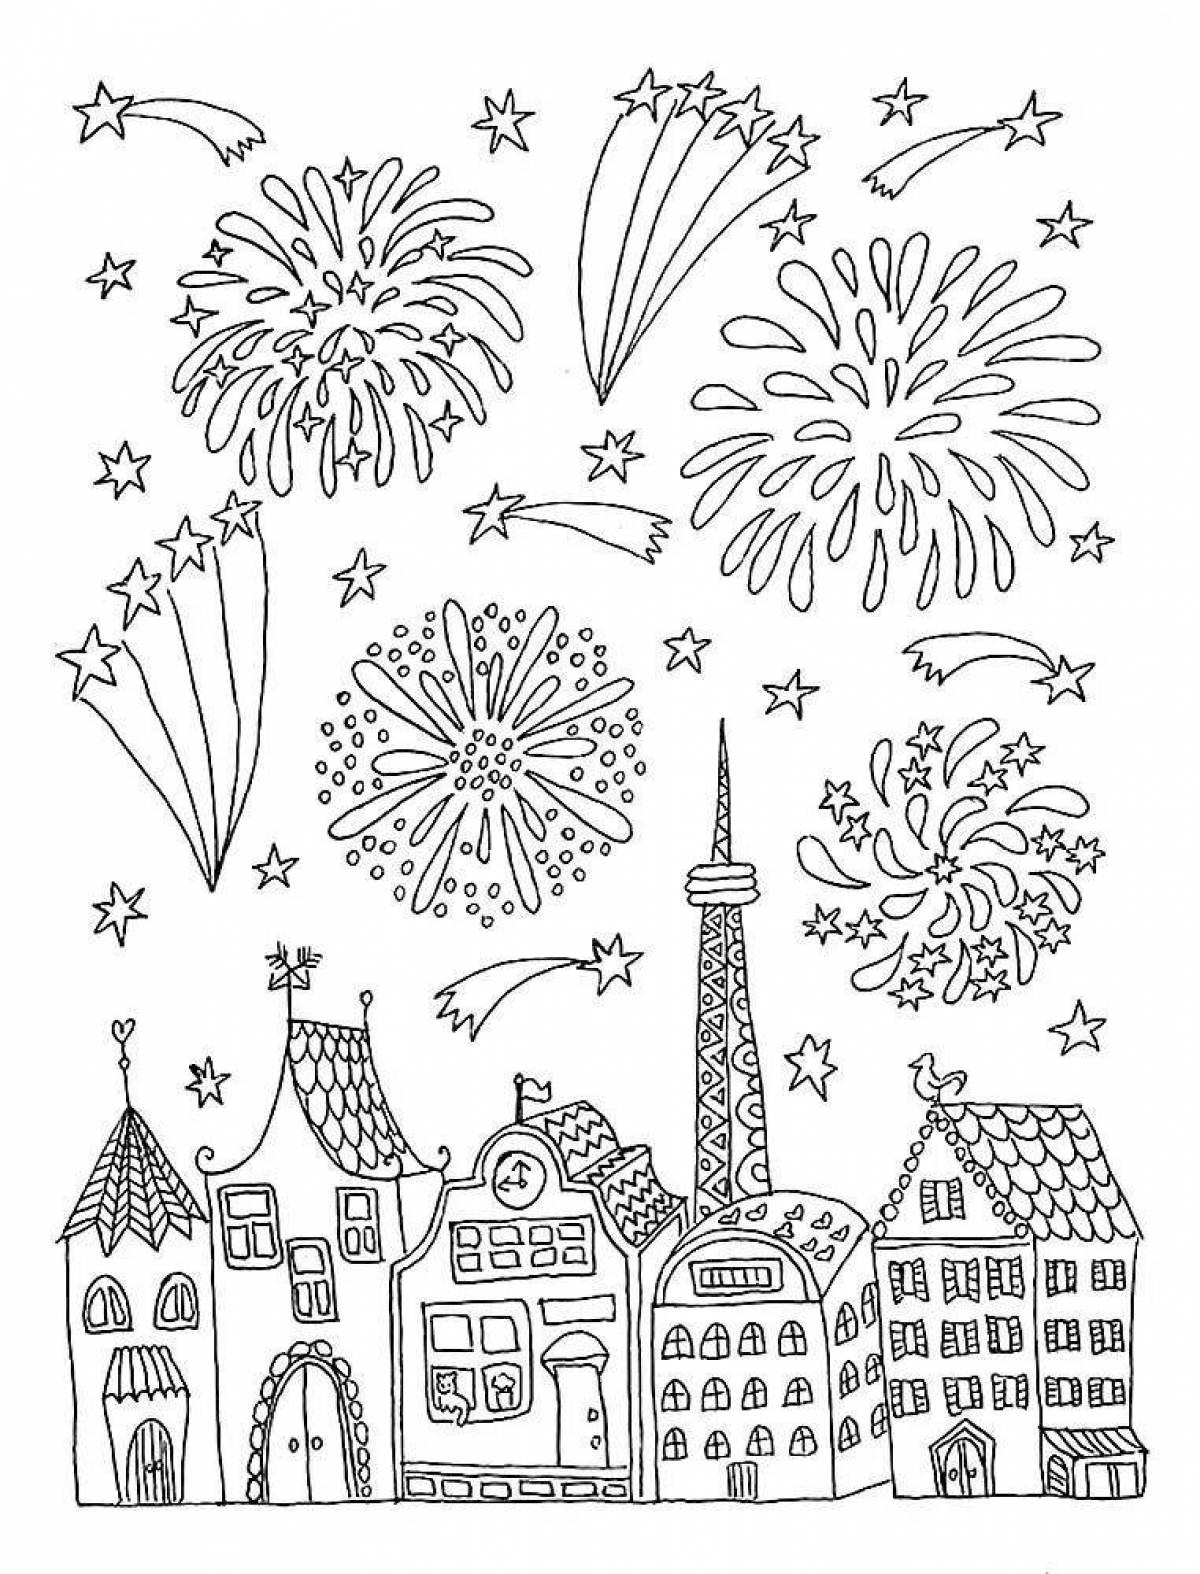 Fine fireworks coloring book